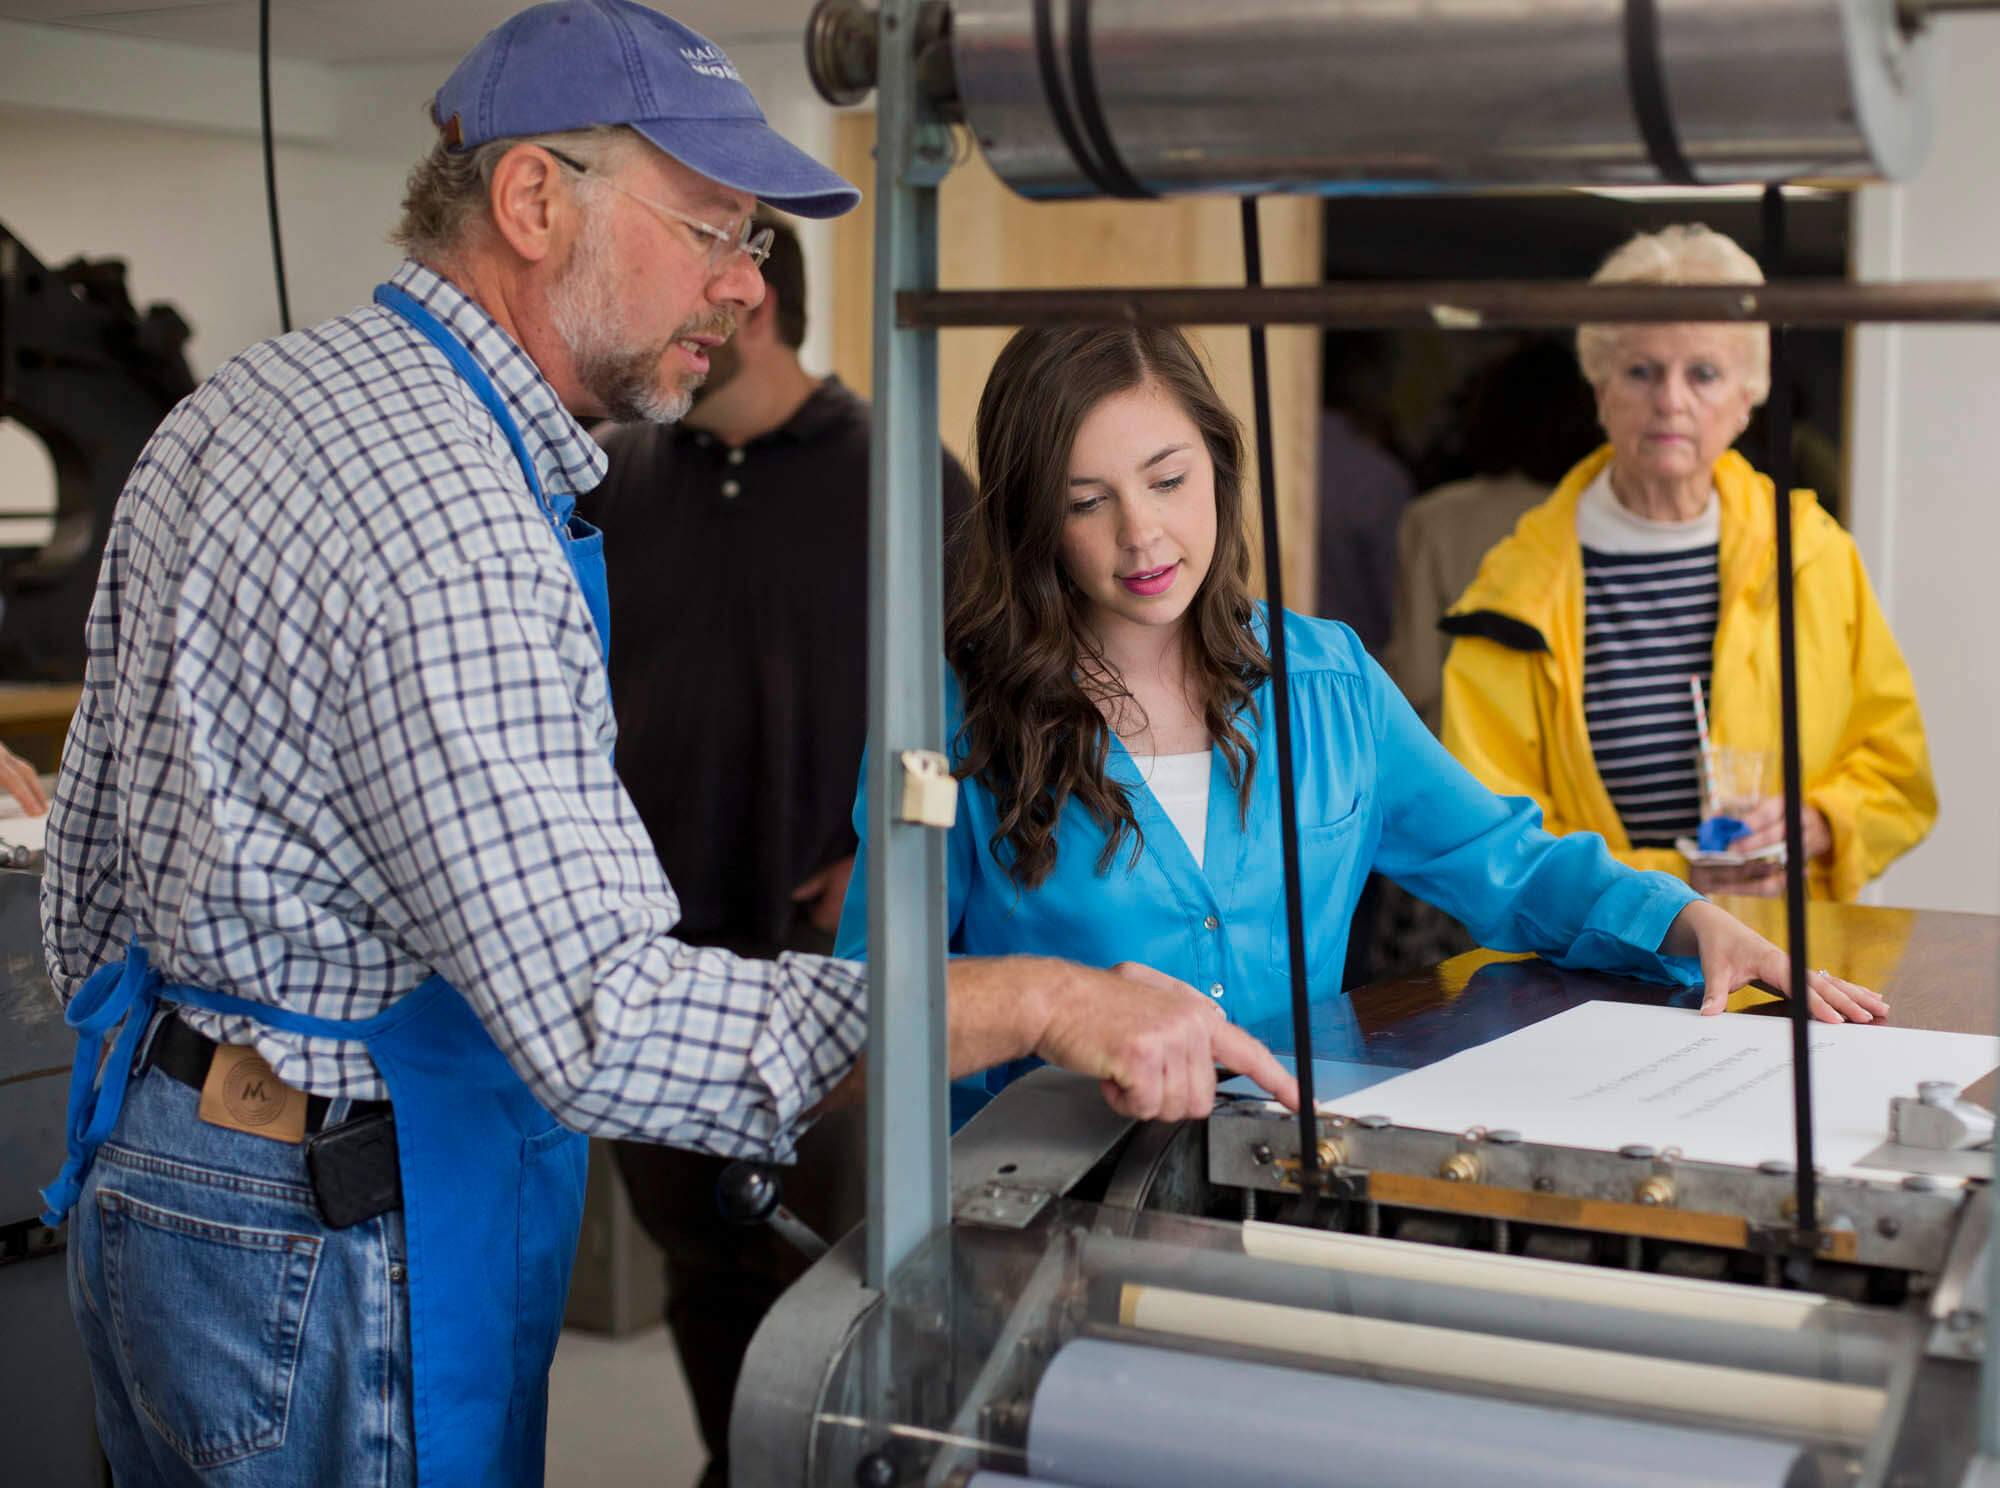 Charles Altschul does a printing making demonstration using photopolymer plates on the Vandercook printing press.